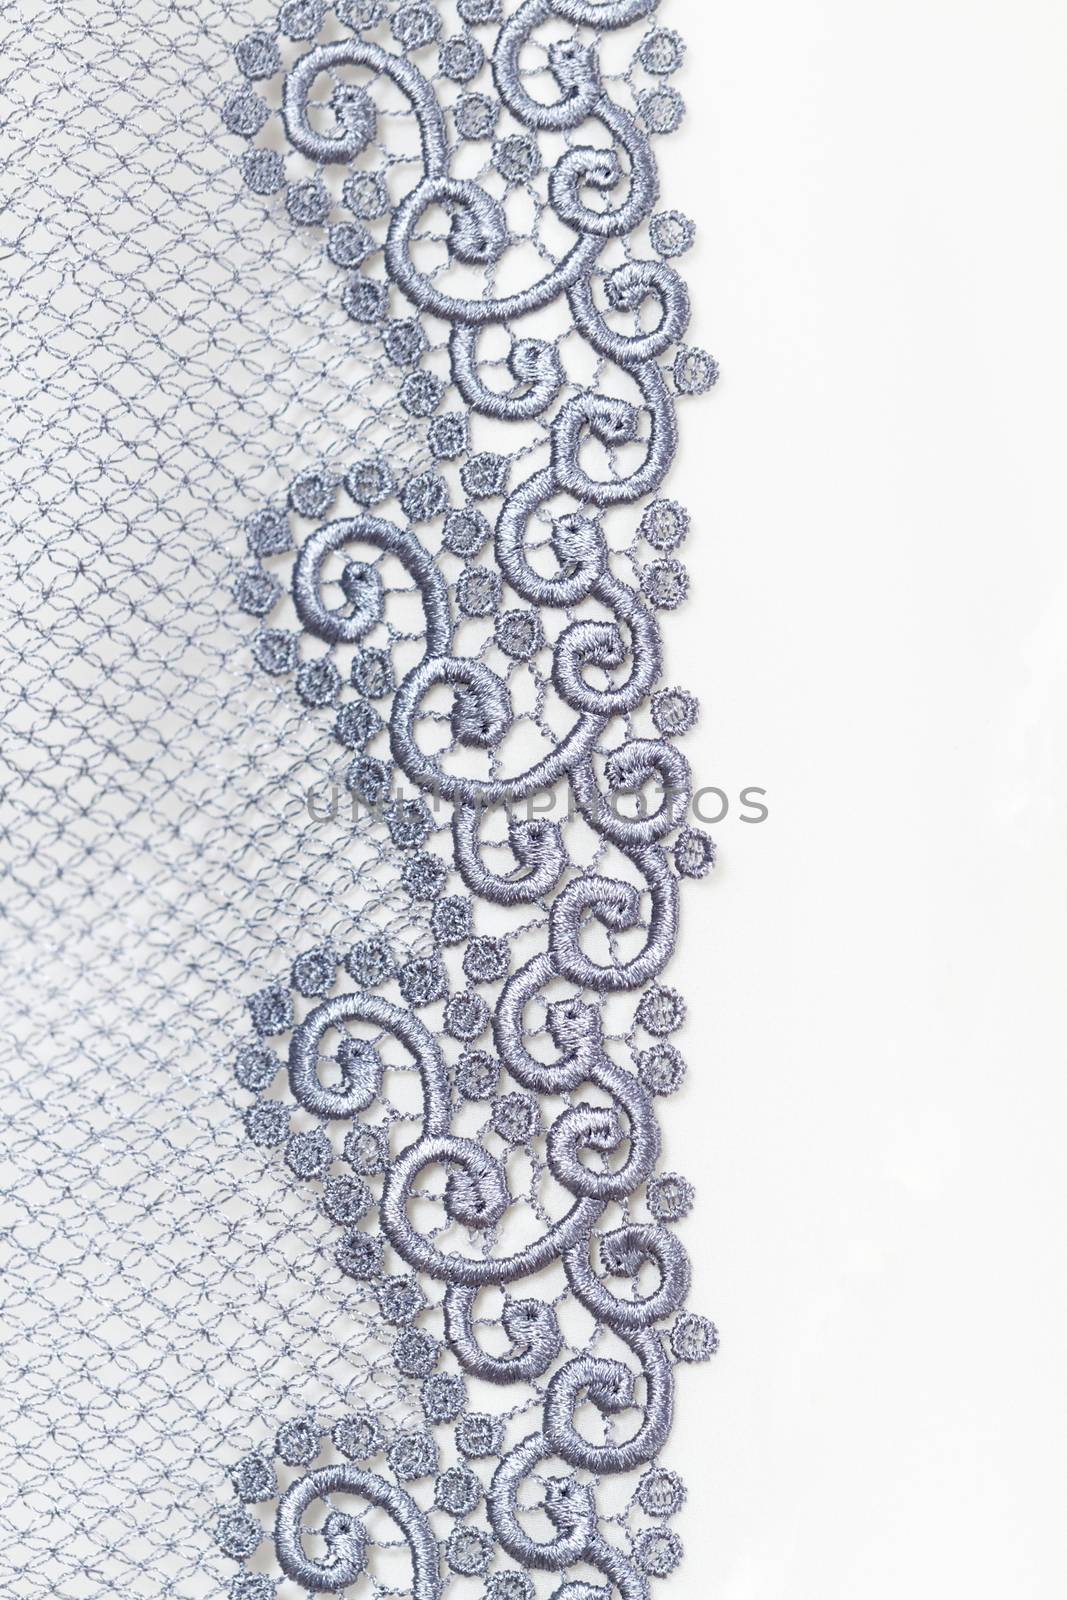 Decorative silver lace by Nneirda